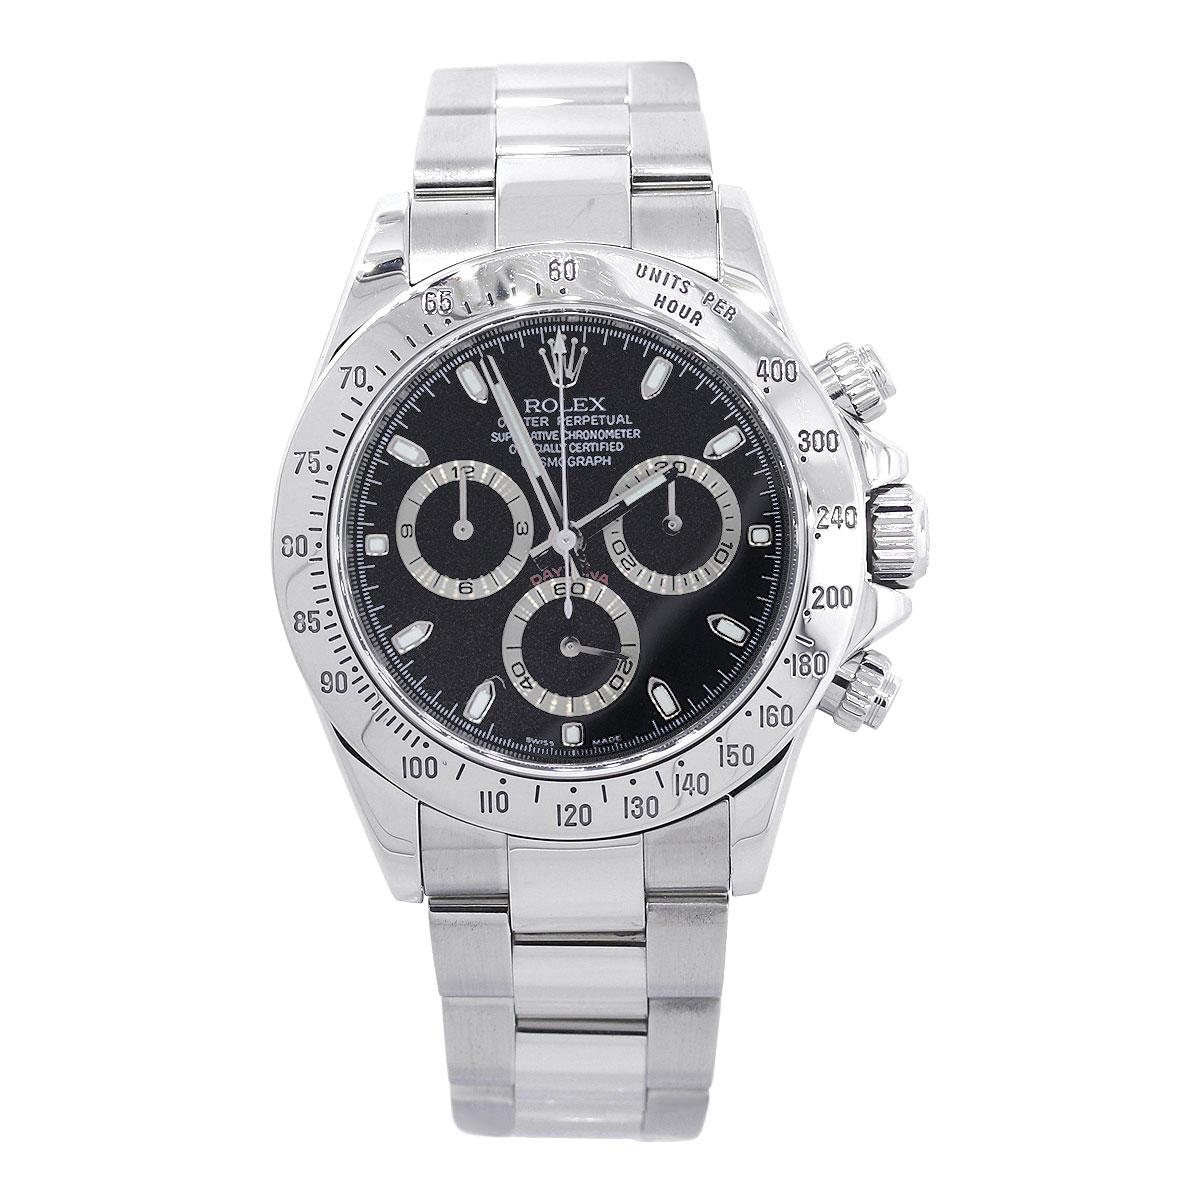 Brand: Rolex
MPN: 116520
Model: Daytona
Case Material: Stainless Steel
Case Diameter: 40mm
Crystal: Scratch resistant sapphire
Bezel: Original Rolex fixed stainless steel bezel with an engraved Tachymetric scale
Dial: Black chronograph dial with